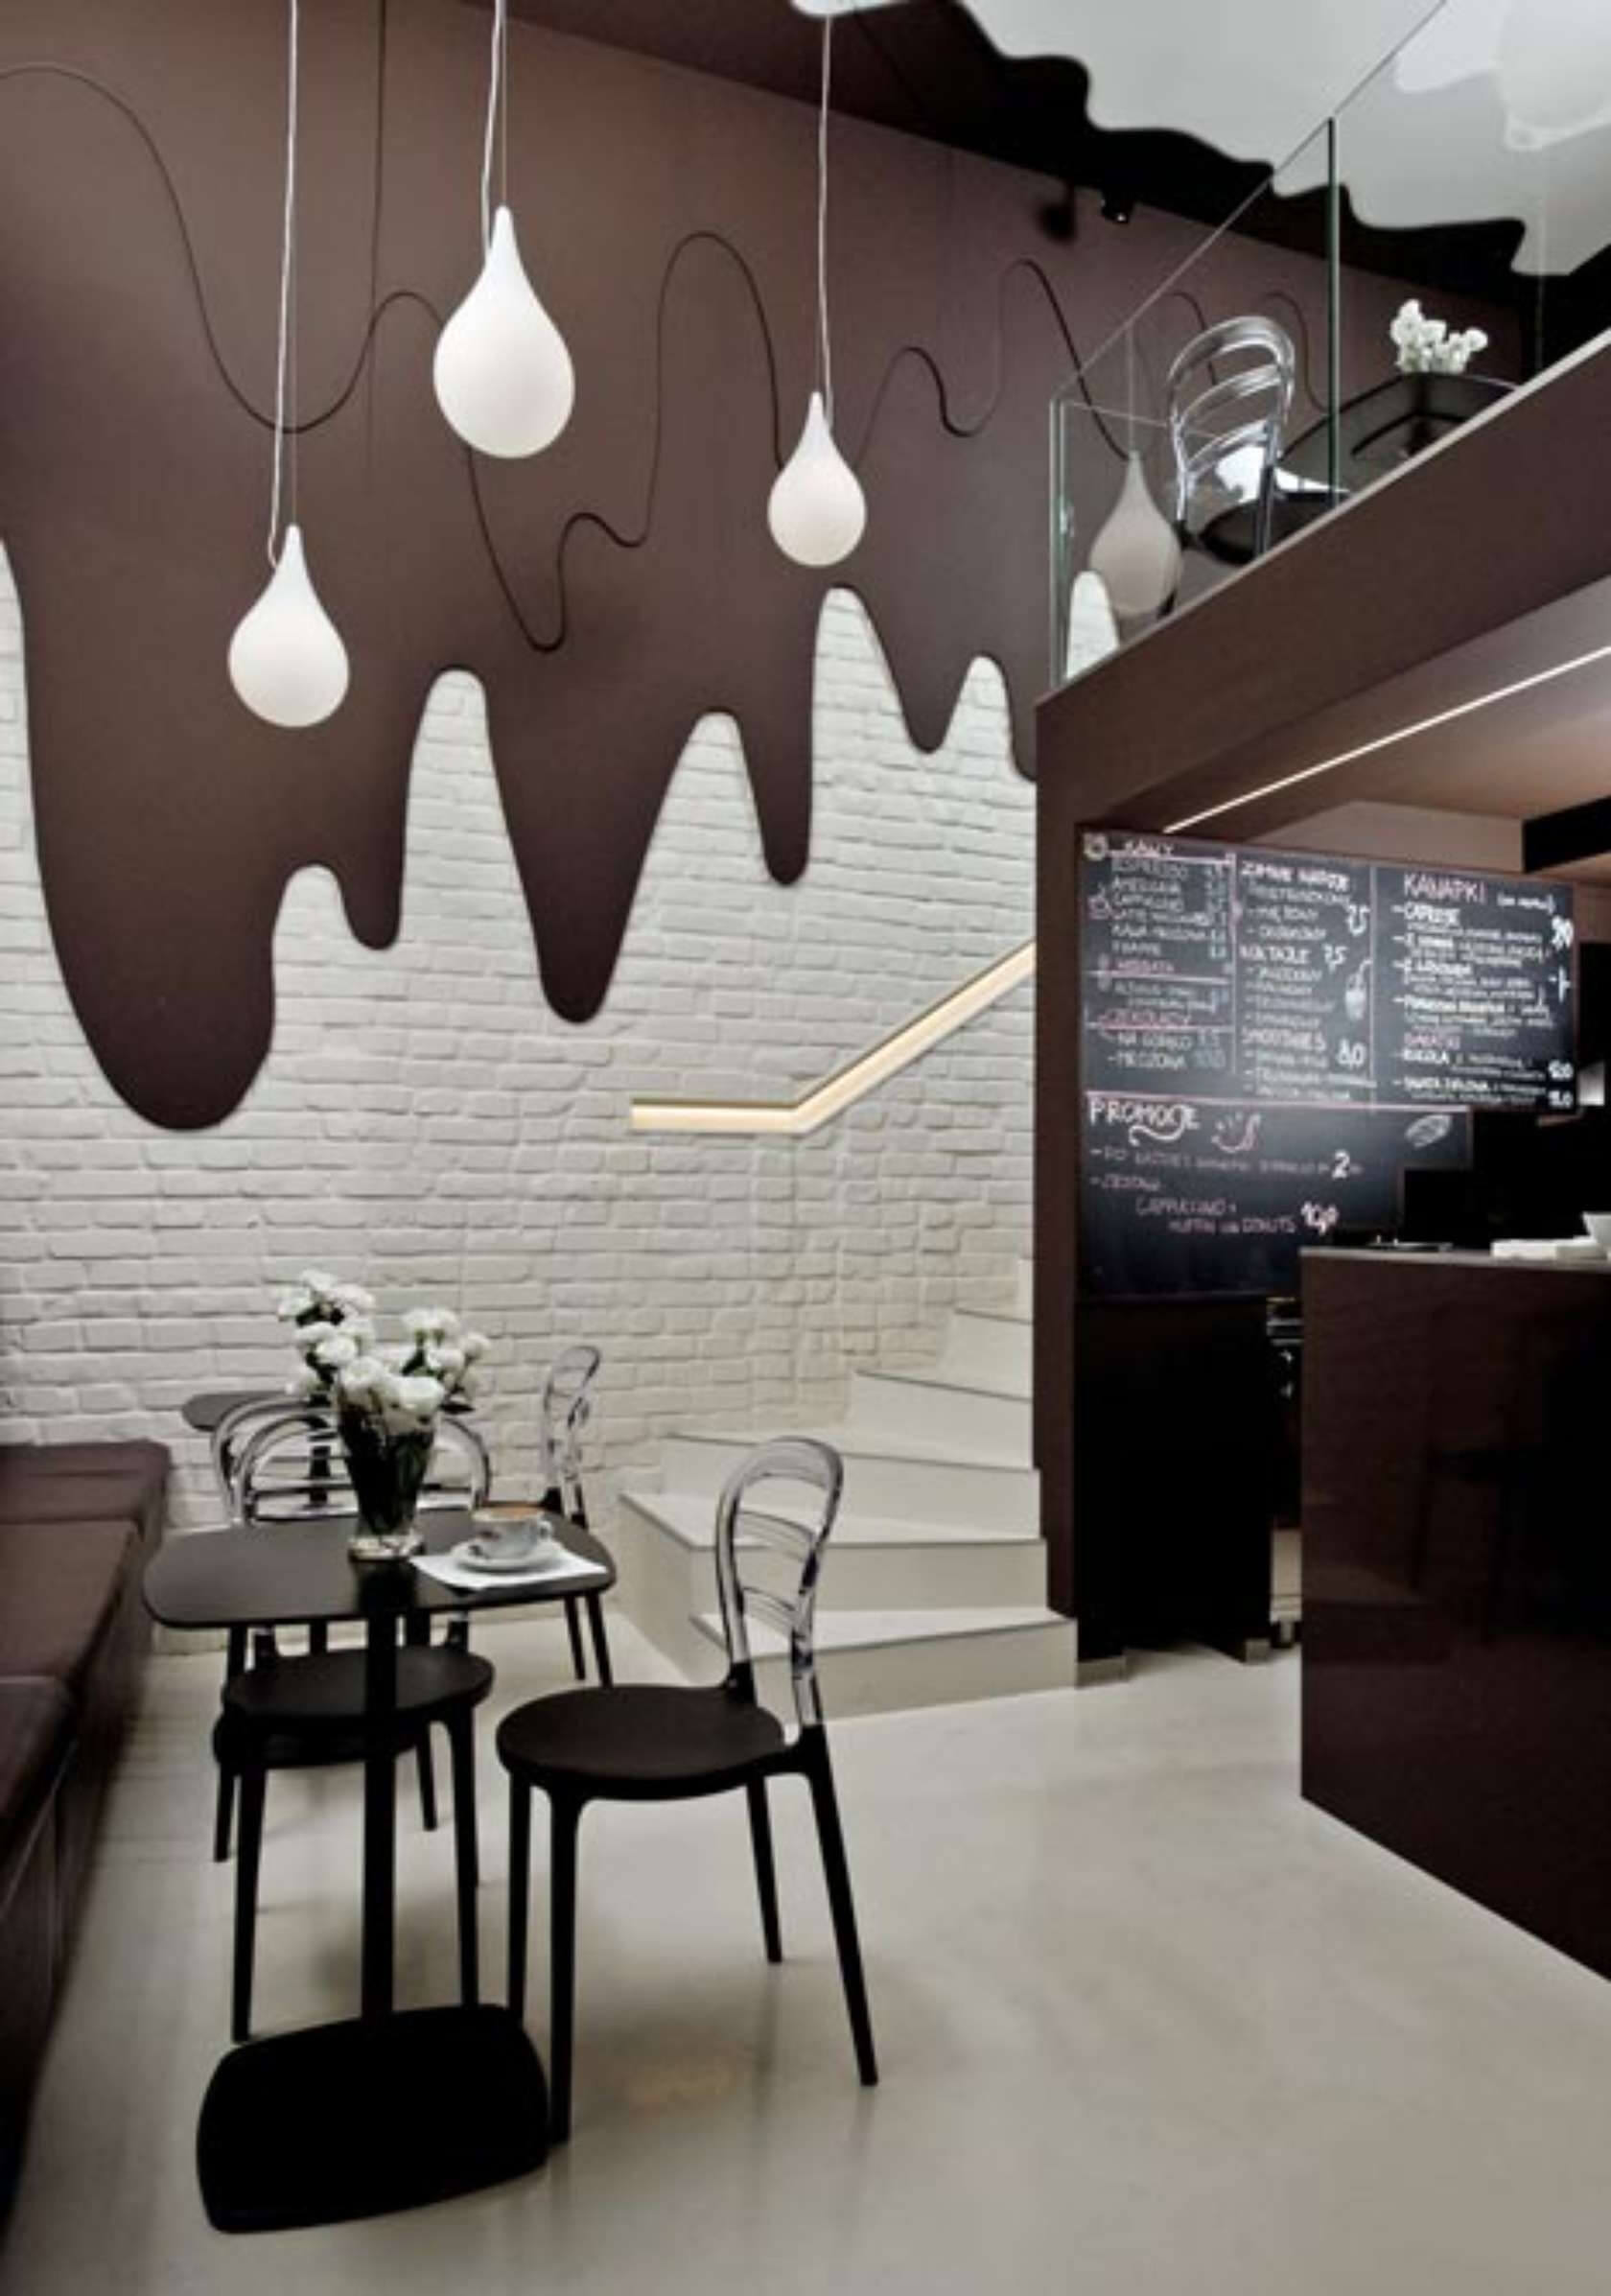 Cafe Wall Design 2 